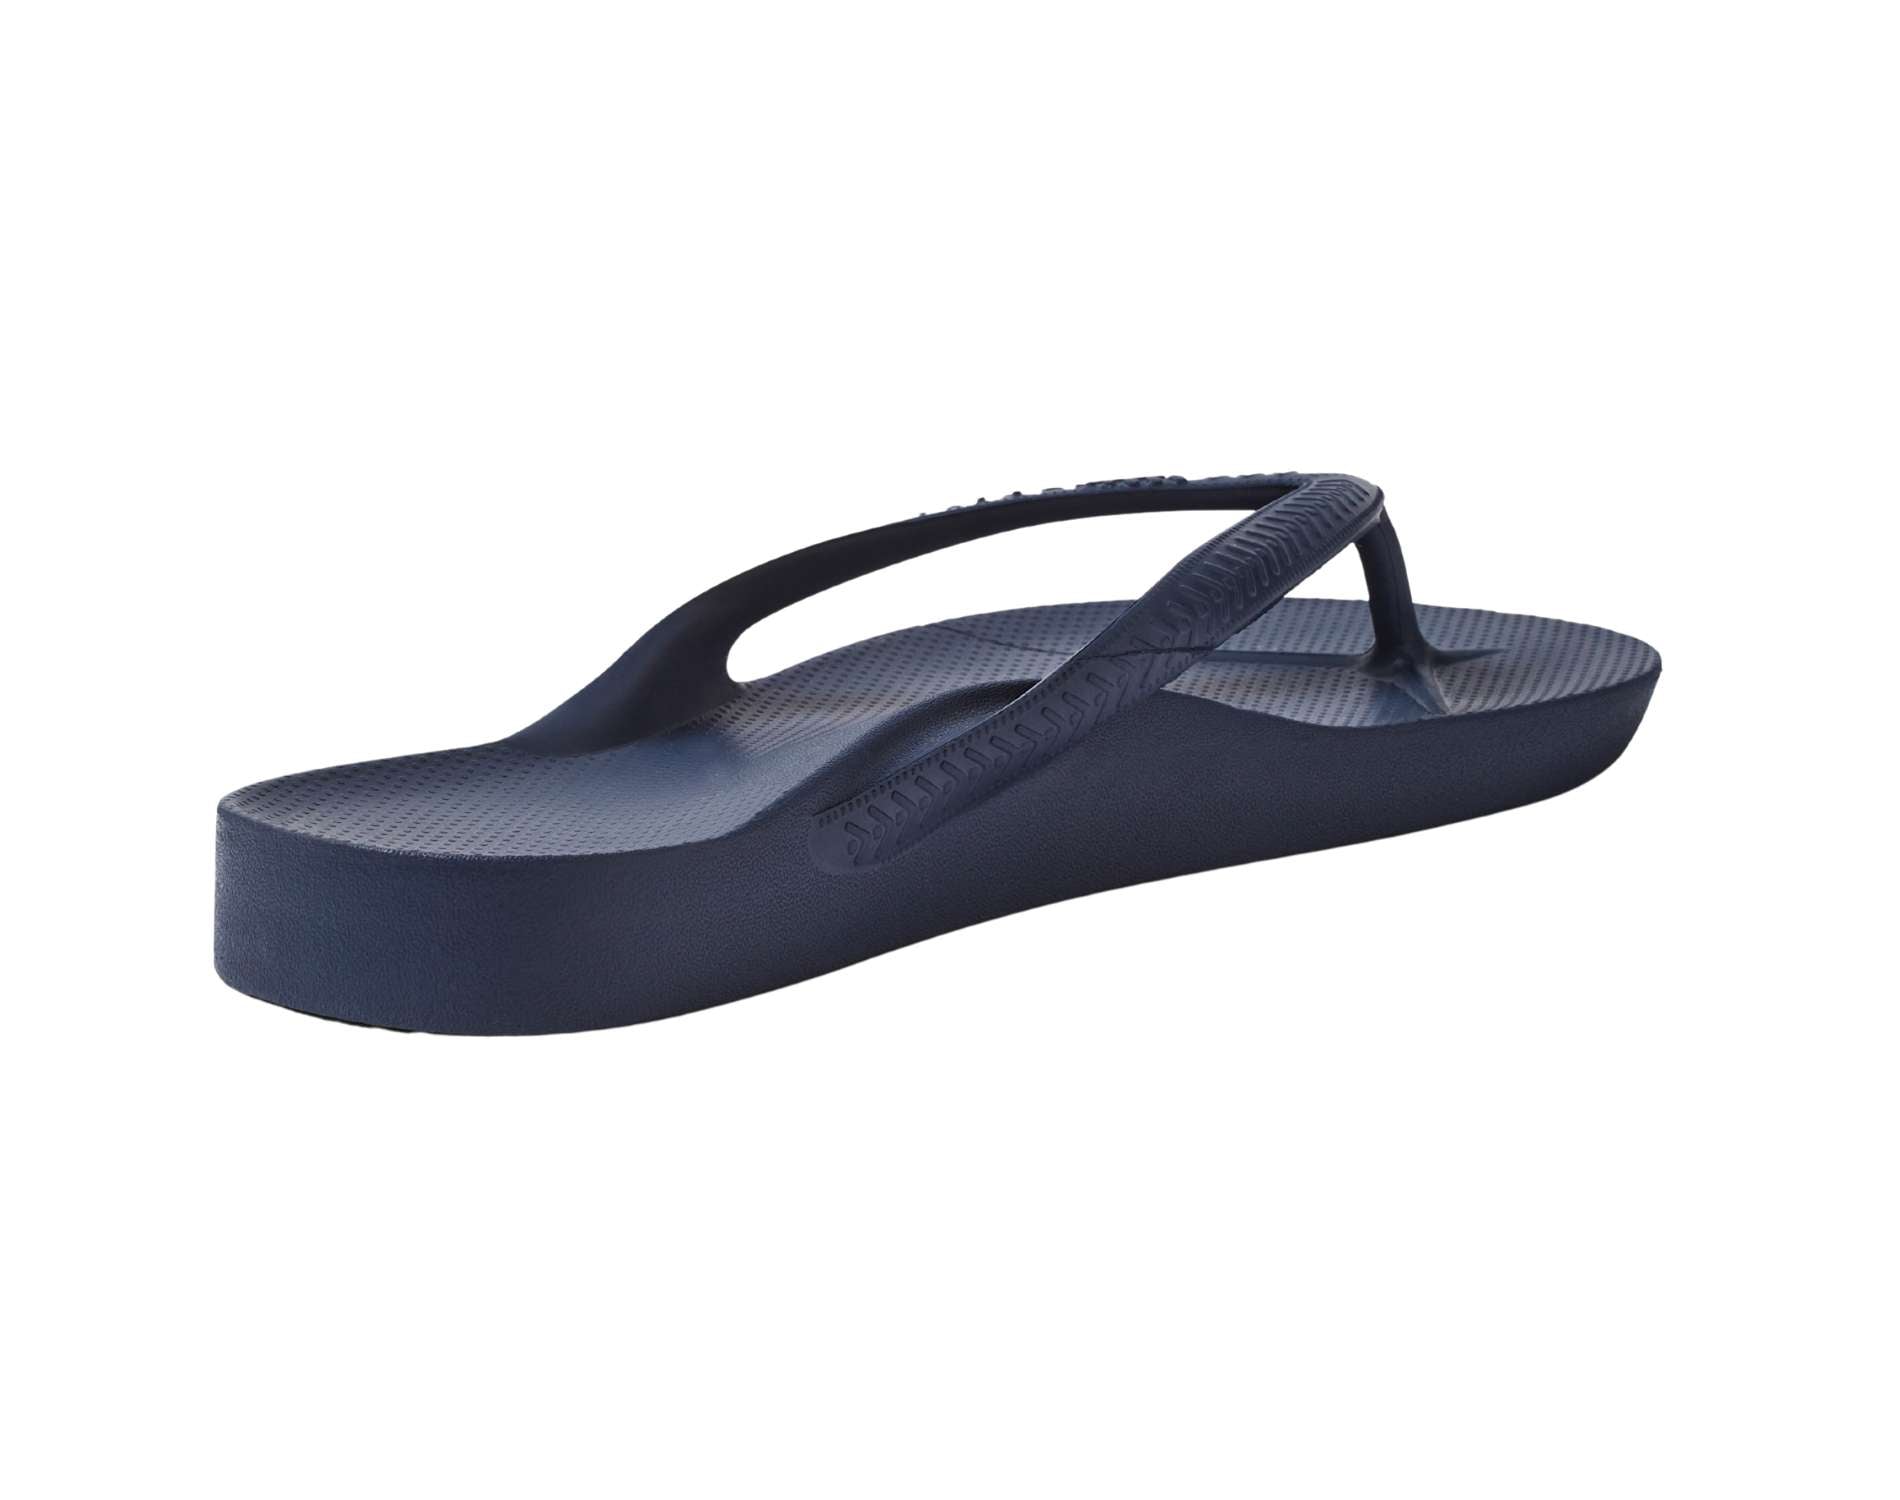 Archies arch support thongs in navy colour